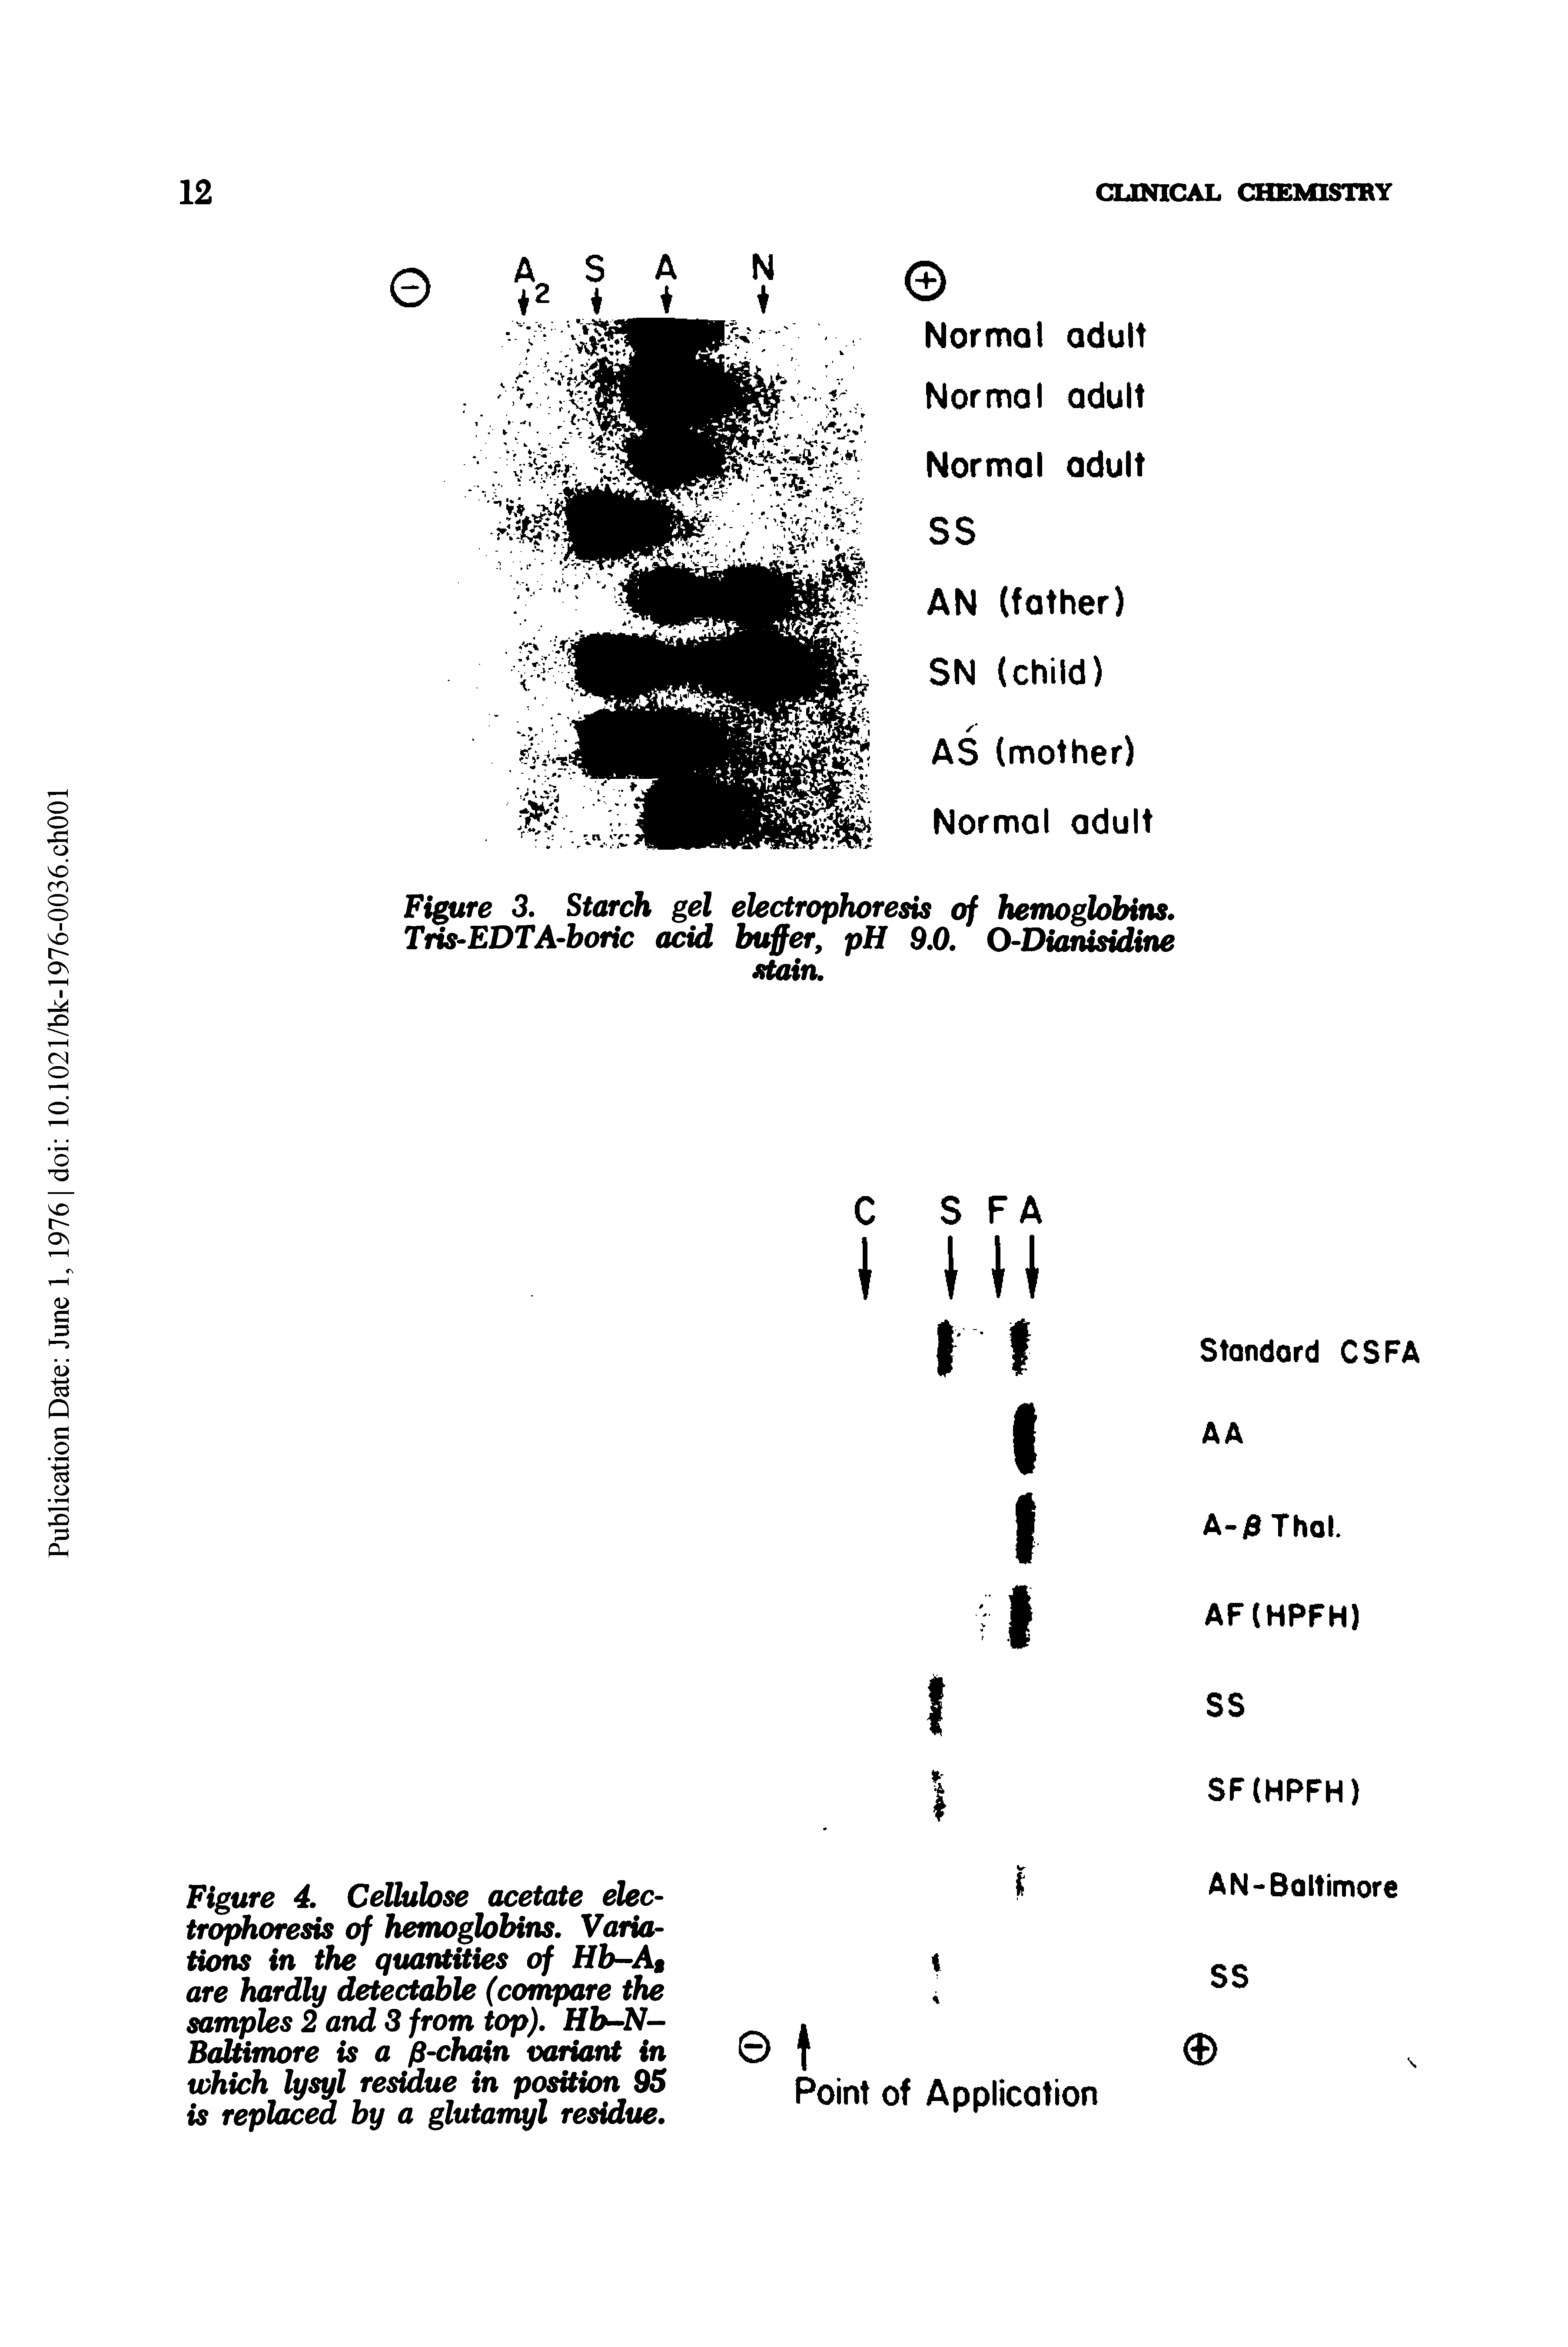 Figure 4. Cellulose acetate electrophoresis of hemoglobins. Variations in the quantities of Hb-Ag are hardly detectable (cornpare the samples 2 and 3 from top). Hb-N Baltimore is a p-chain variant in which lysyl residue in position 95 is replaced by a glutarnyl residue.